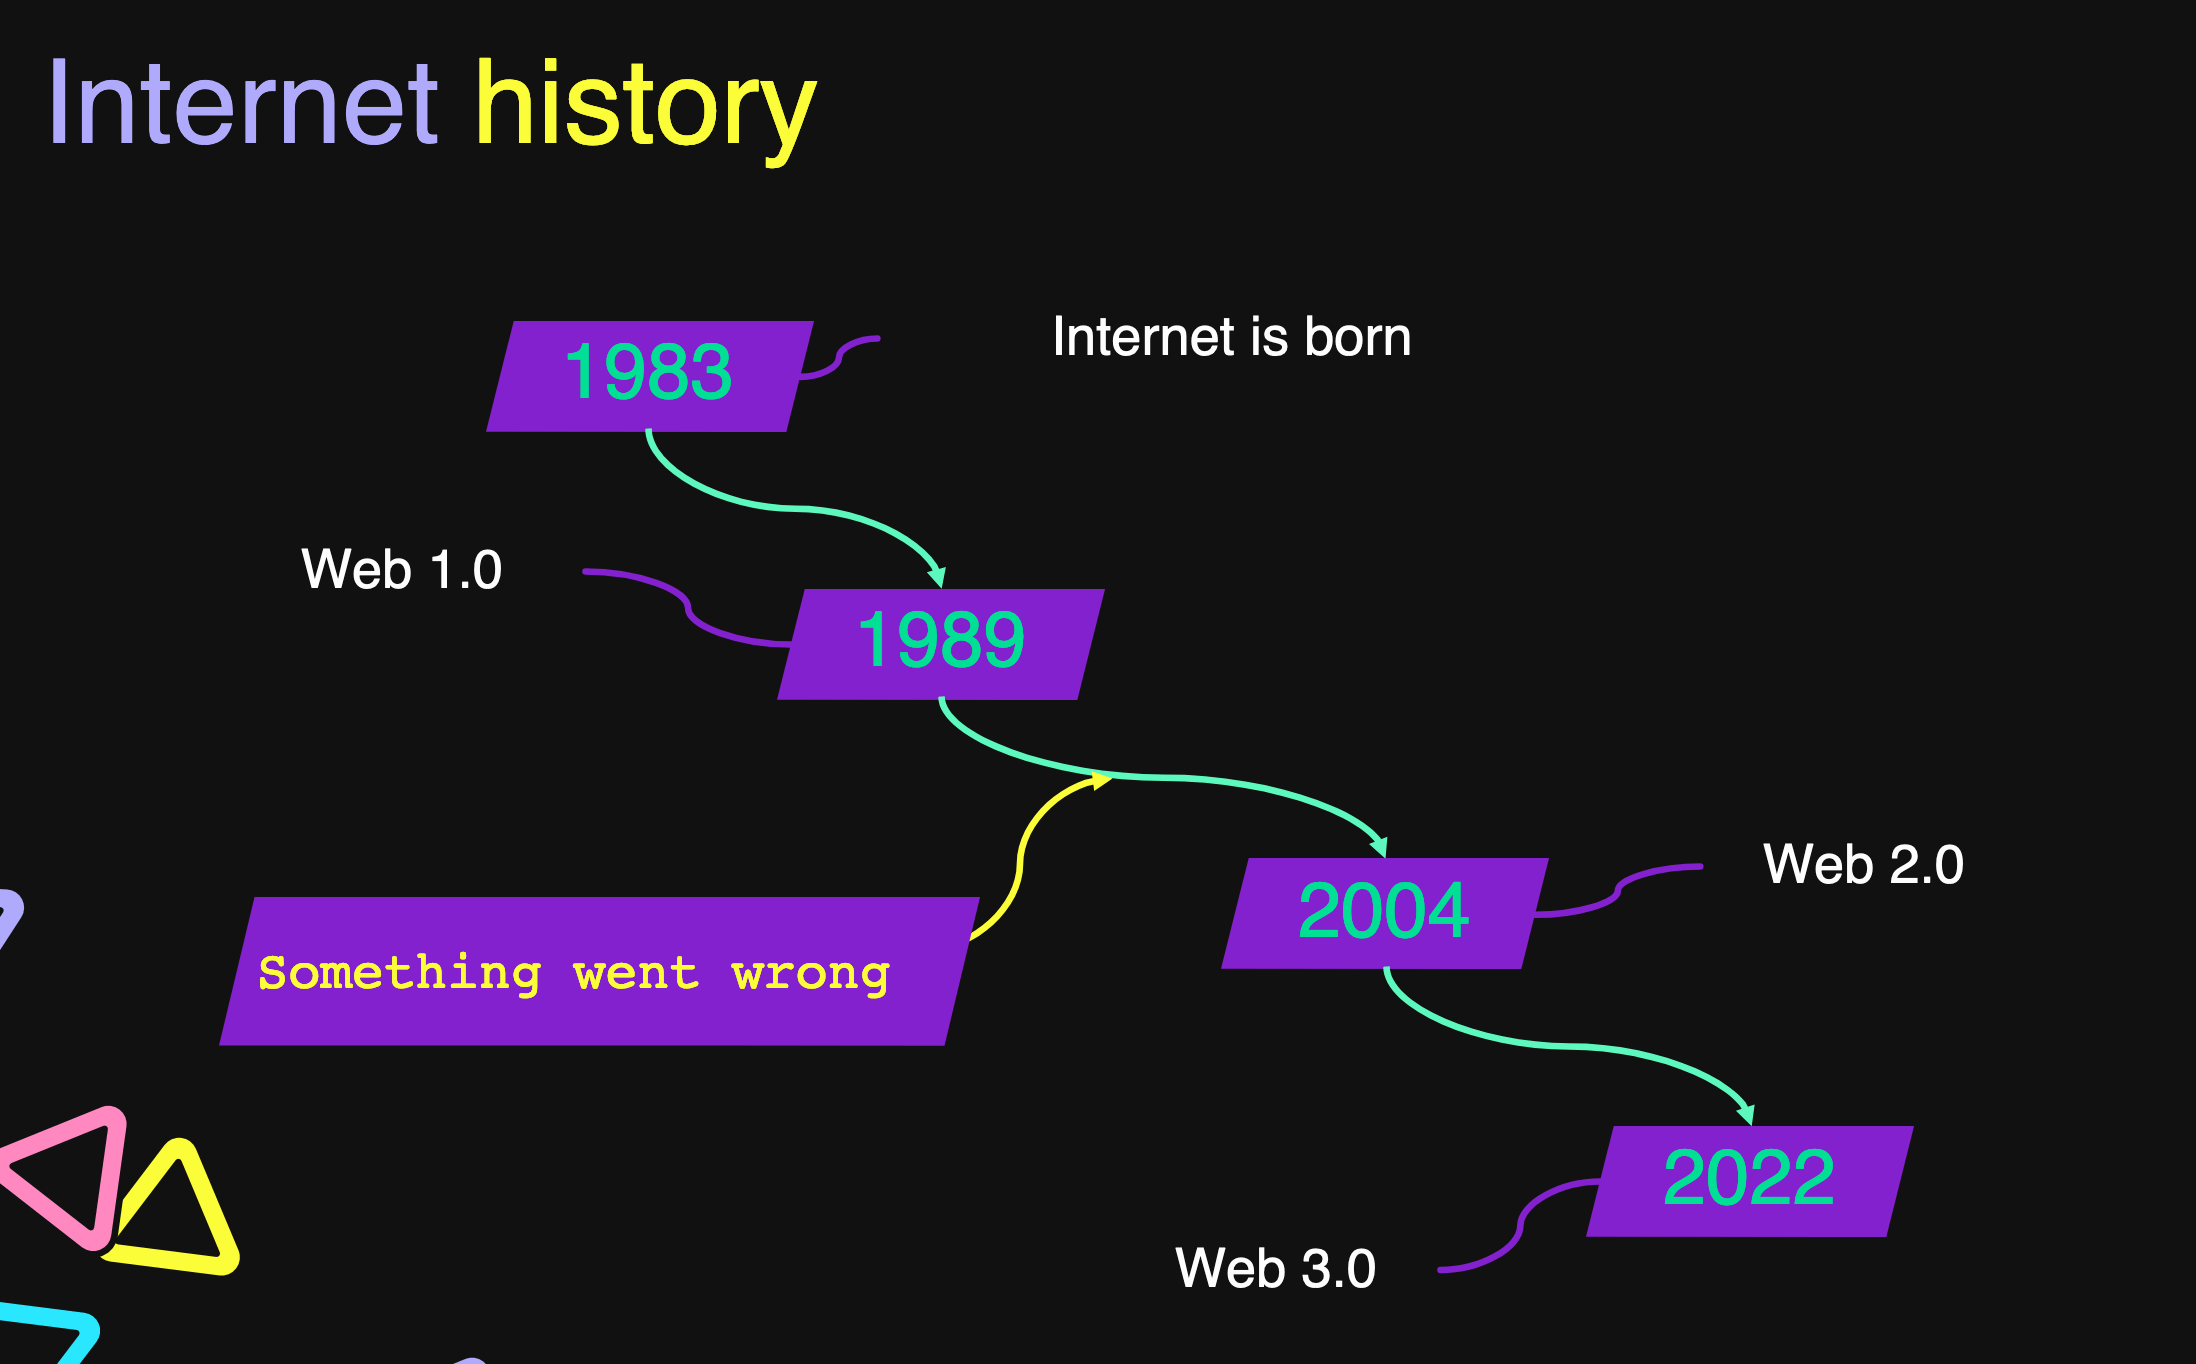 Internet history timeline styled in 90s colors of purple and teal shows 1983 – internet is born; 1989 – Web 1.0; 2004 – Web 2.0; 2022 – Web 3.0. And between 1989 and 2004, a note says, ‘Something went wrong.’